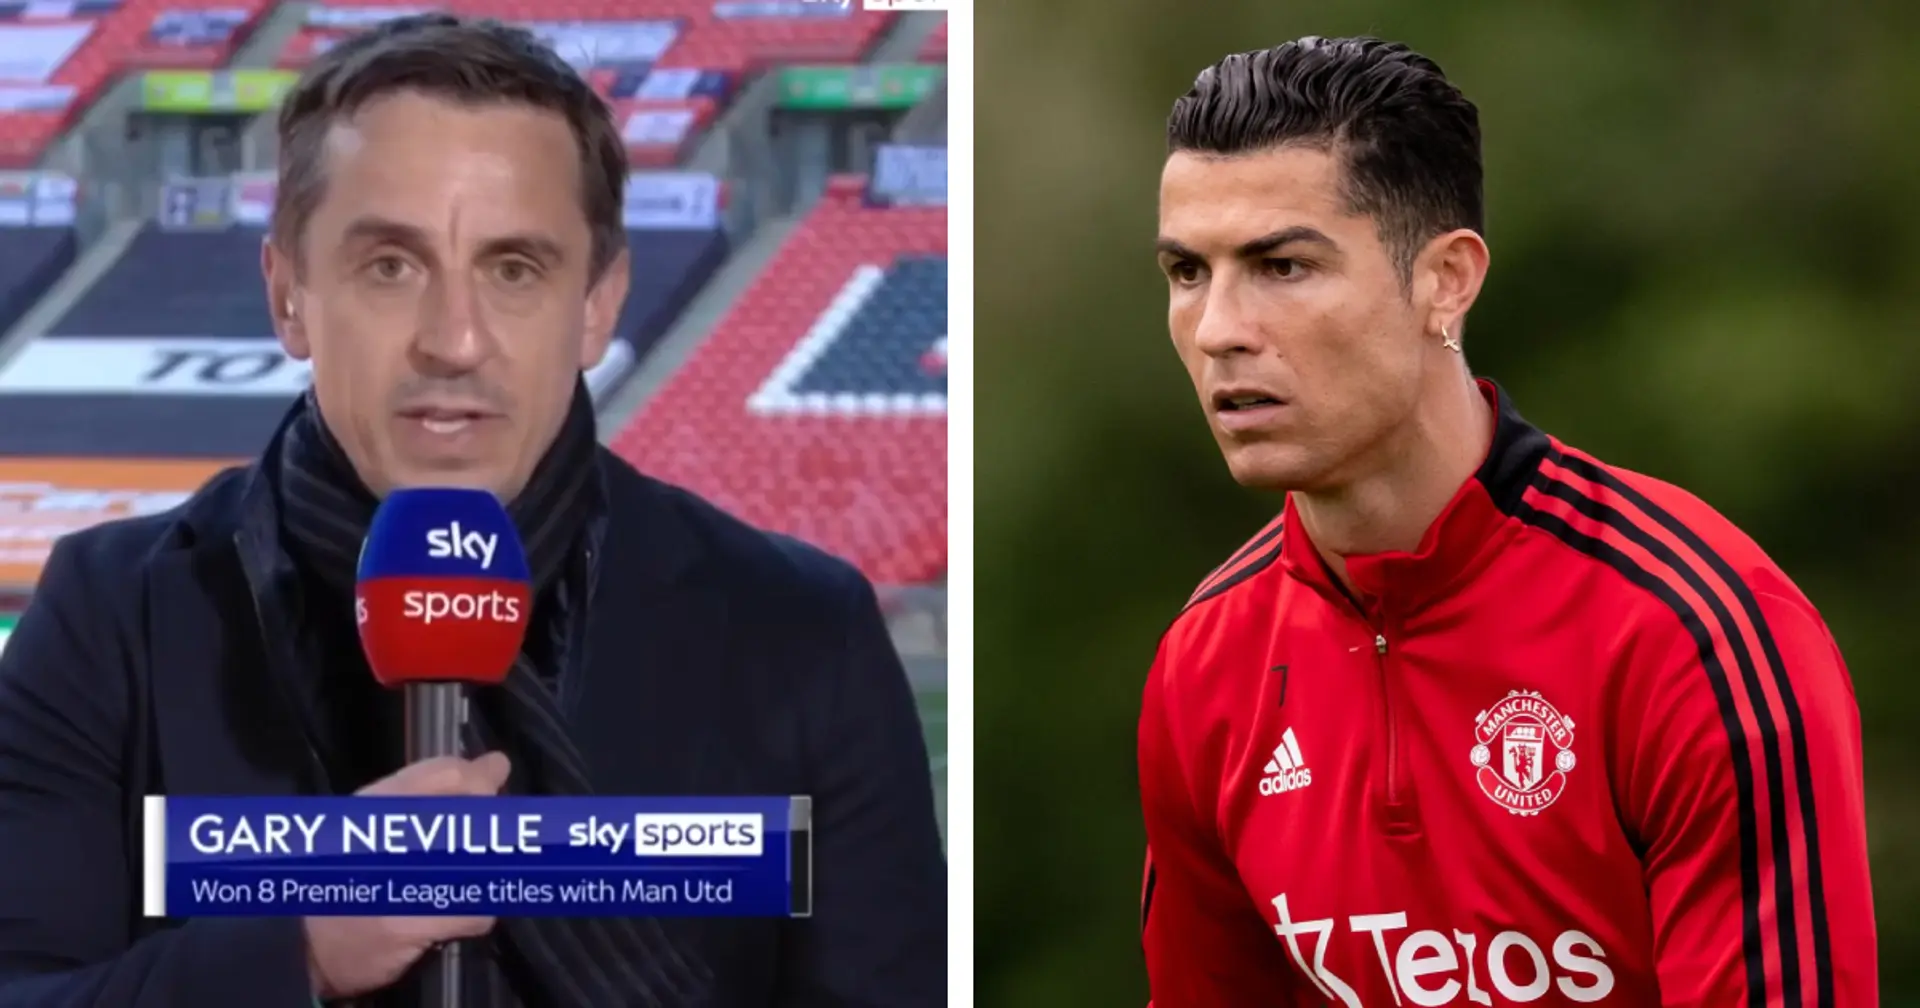 'His priority would be Champions League': Gary Neville speaks out on Ronaldo's future amid Saudi Arabia rumours